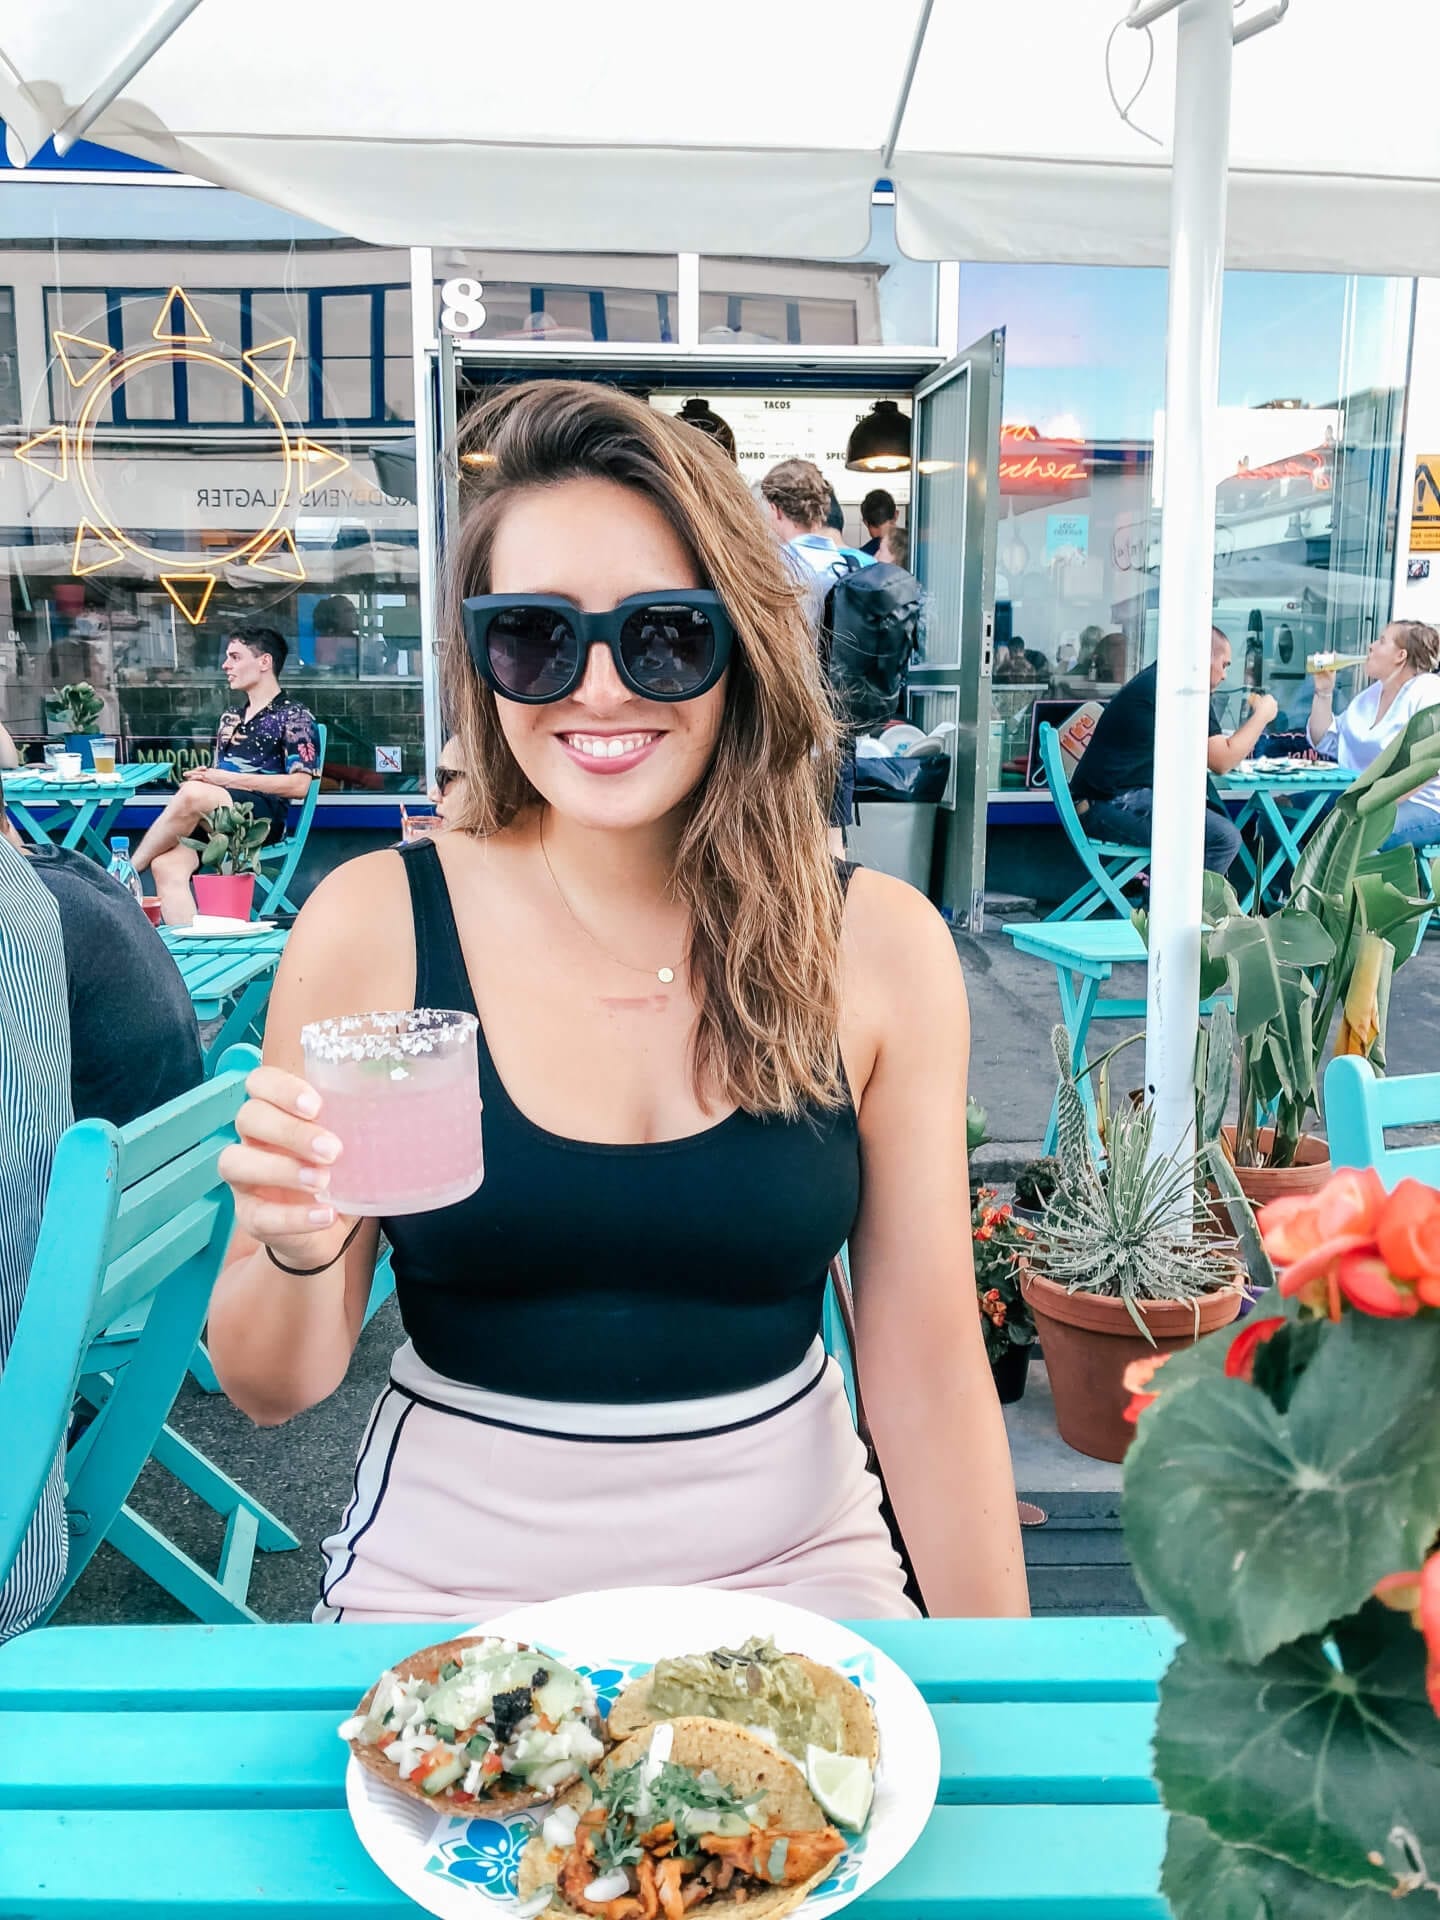 A girl with sunglasses on holding a pink margarita with a plate of tacos in front of her